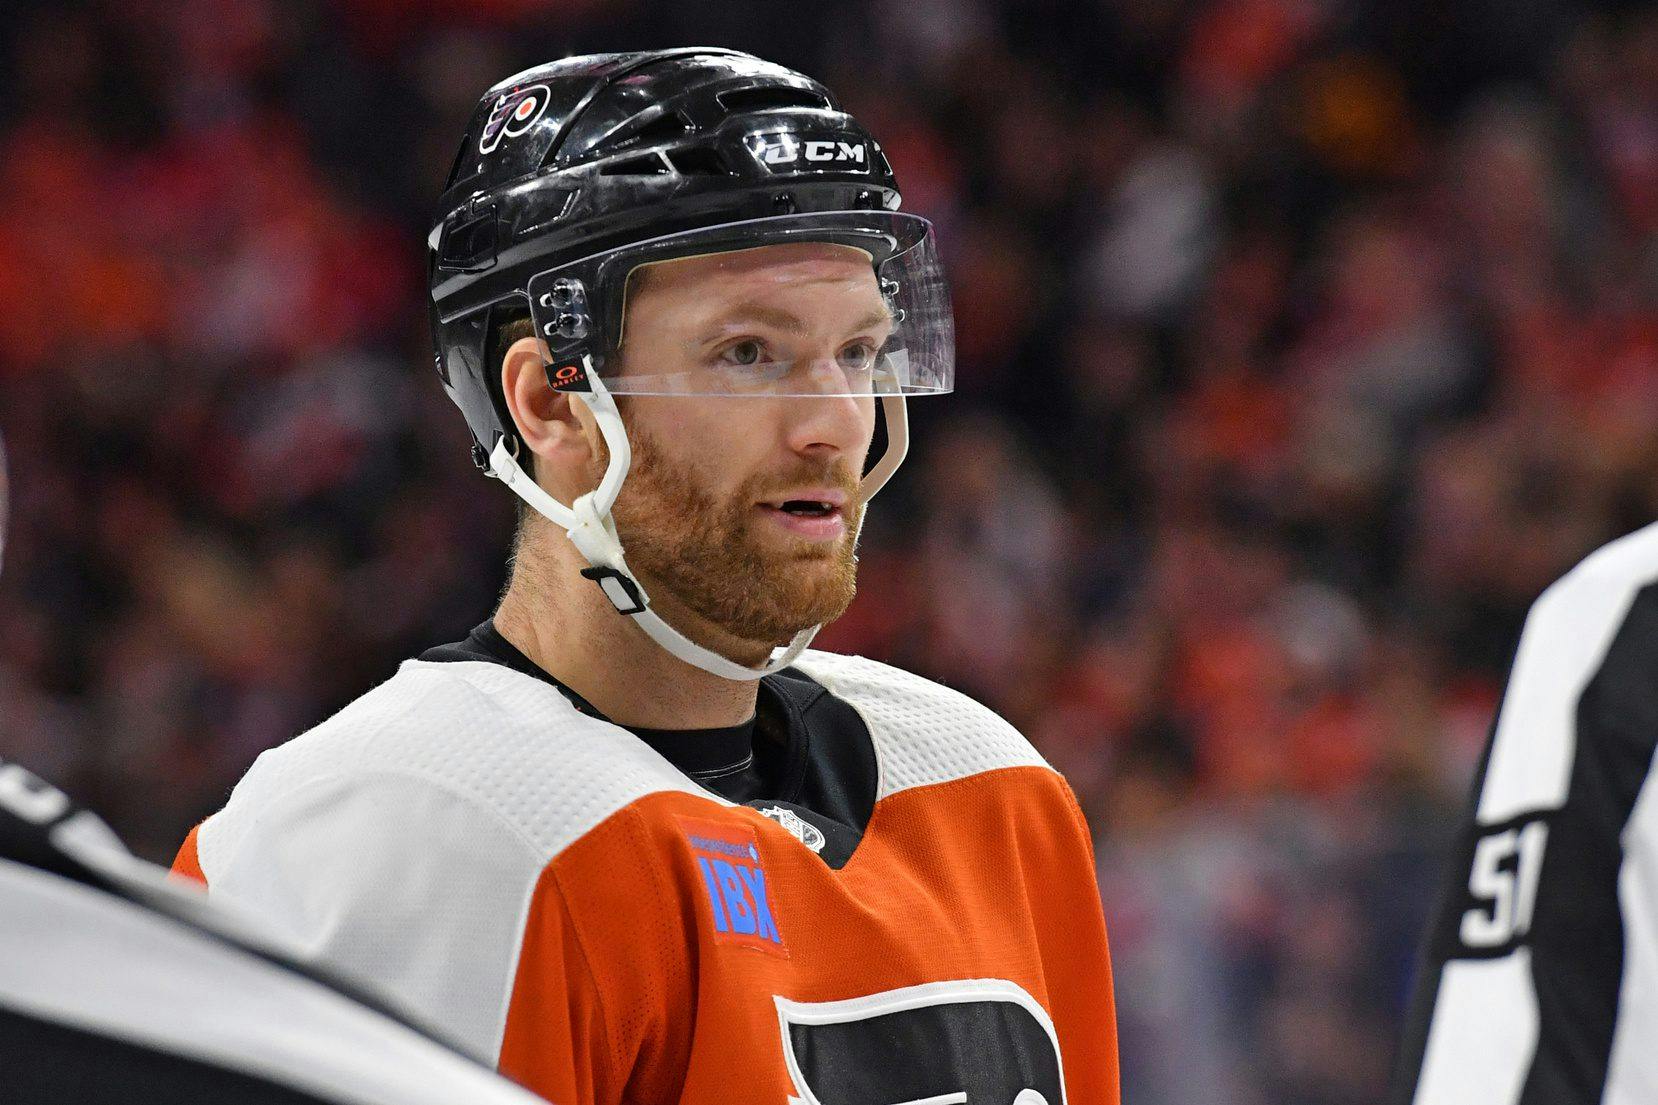 Sean Couturier is turning back the clock for the resurgent Philadelphia Flyers